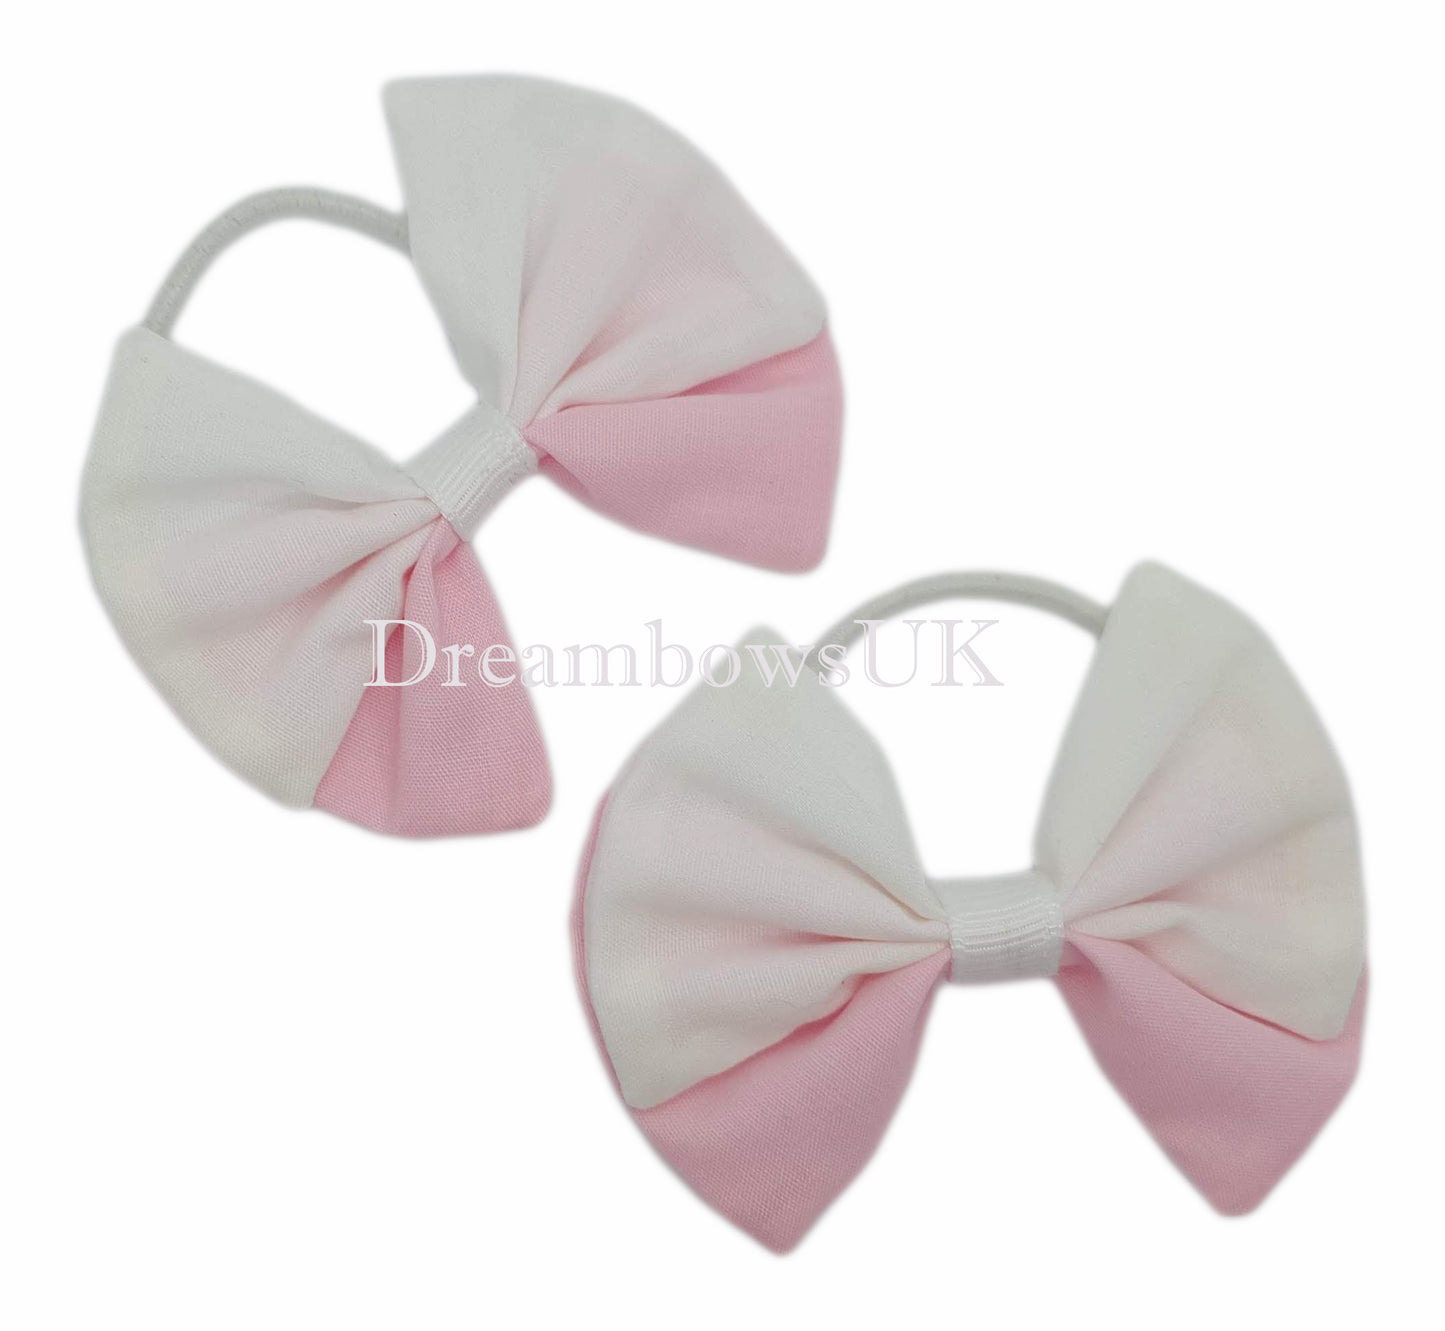 2x Baby pink and white fabric hair bows